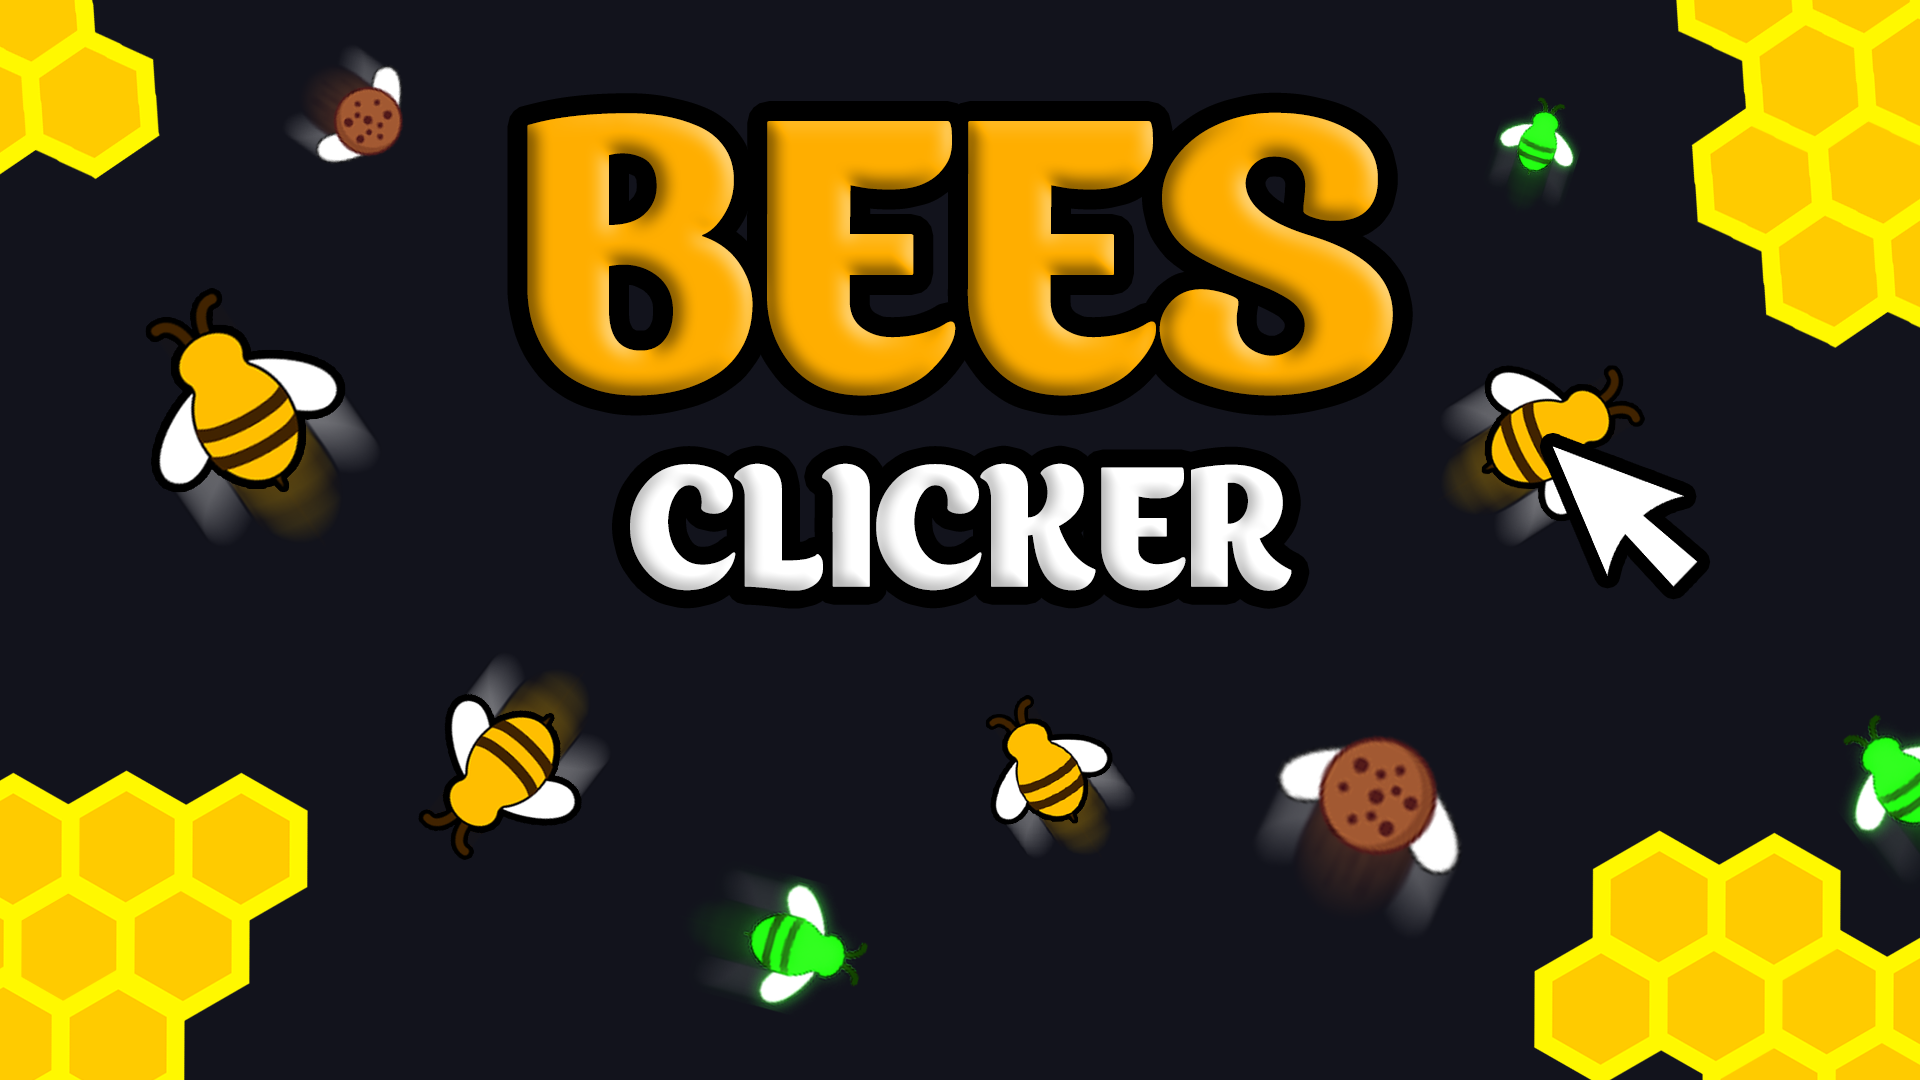 Bees Clicker Game Image